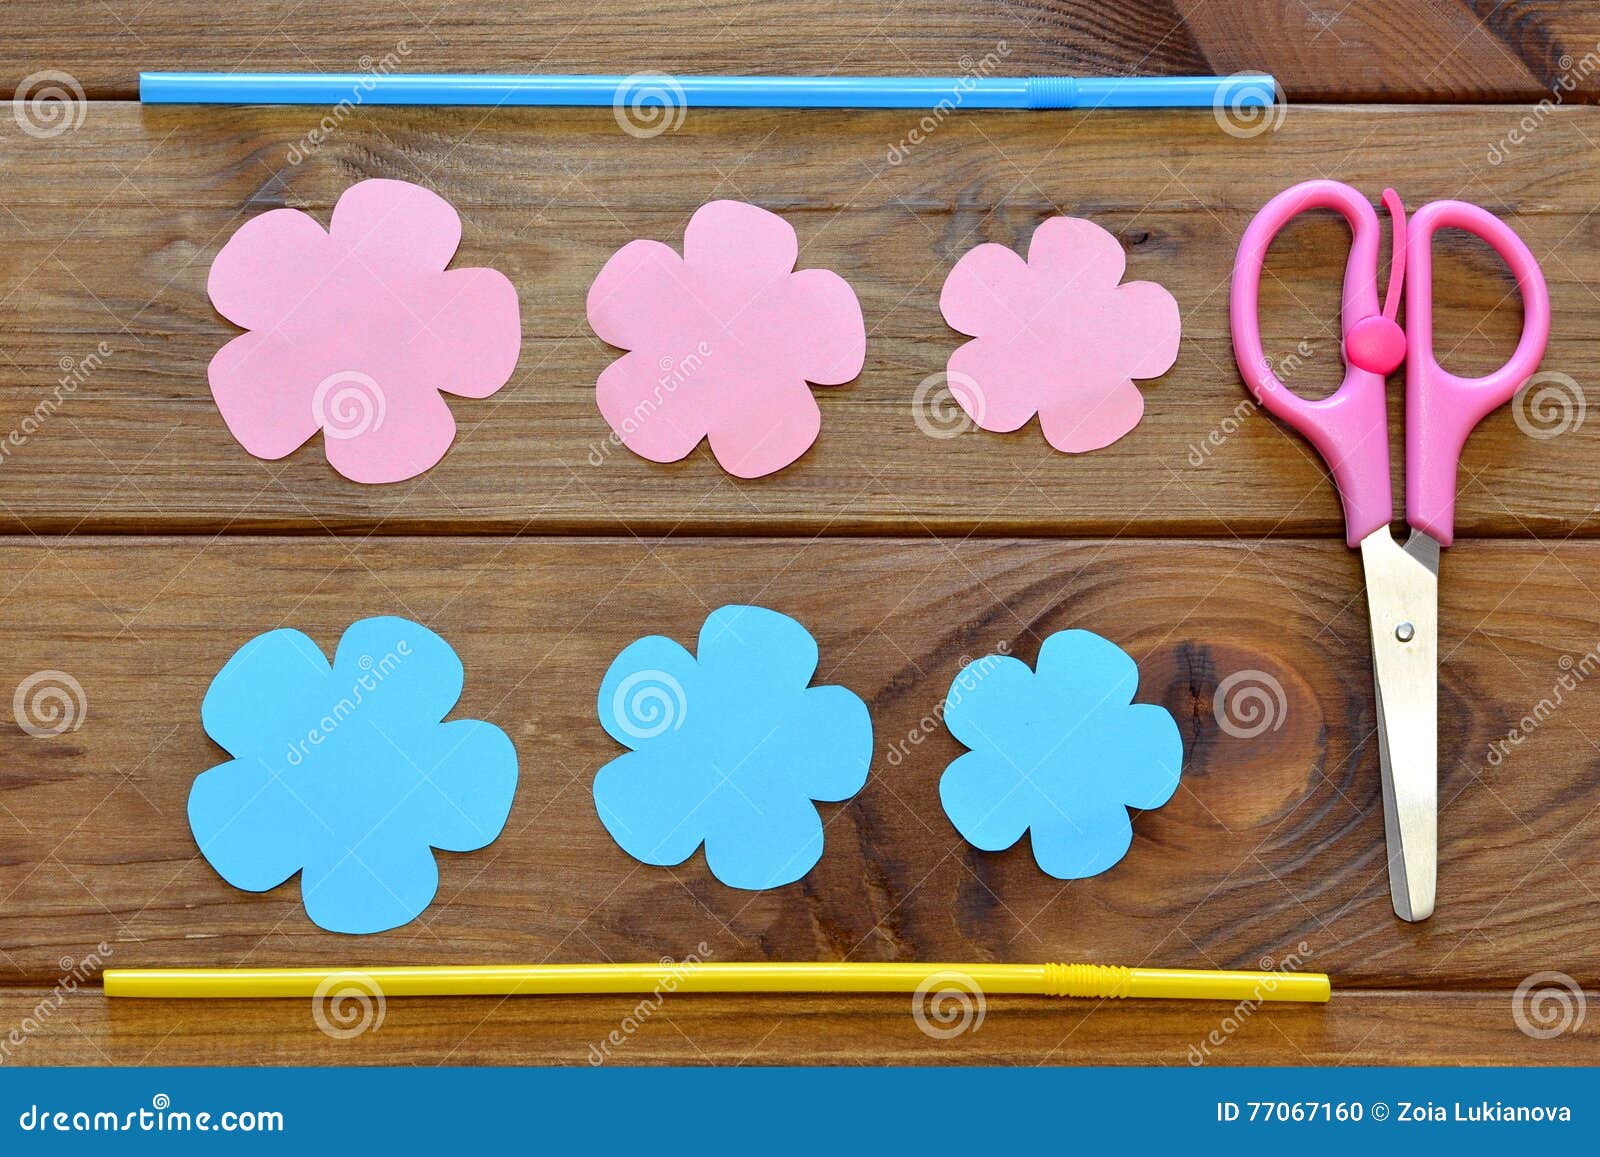 https://thumbs.dreamstime.com/z/paper-flowers-scissors-straws-set-childrens-art-wooden-table-top-view-crafts-cut-colored-77067160.jpg